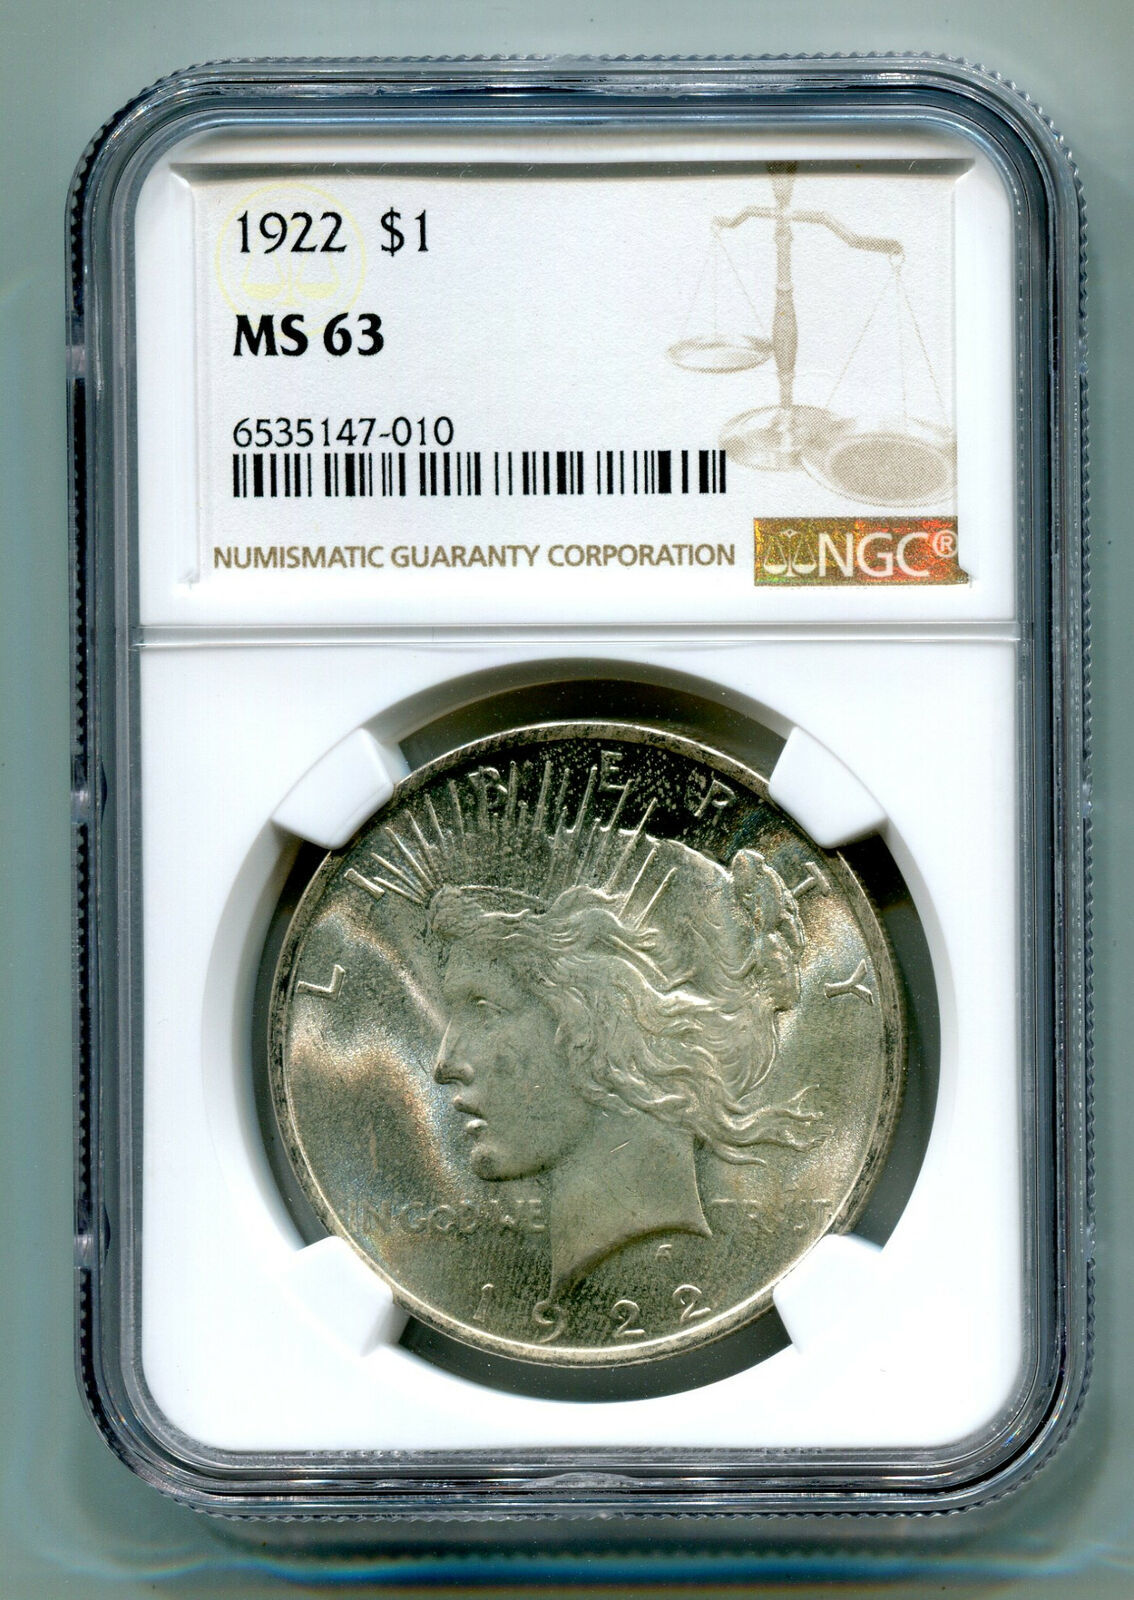 1922 PEACE SILVER DOLLAR NGC MS63 NICE ORIGINAL COIN FROM BOBS COINS FAST SHIP - $69.00